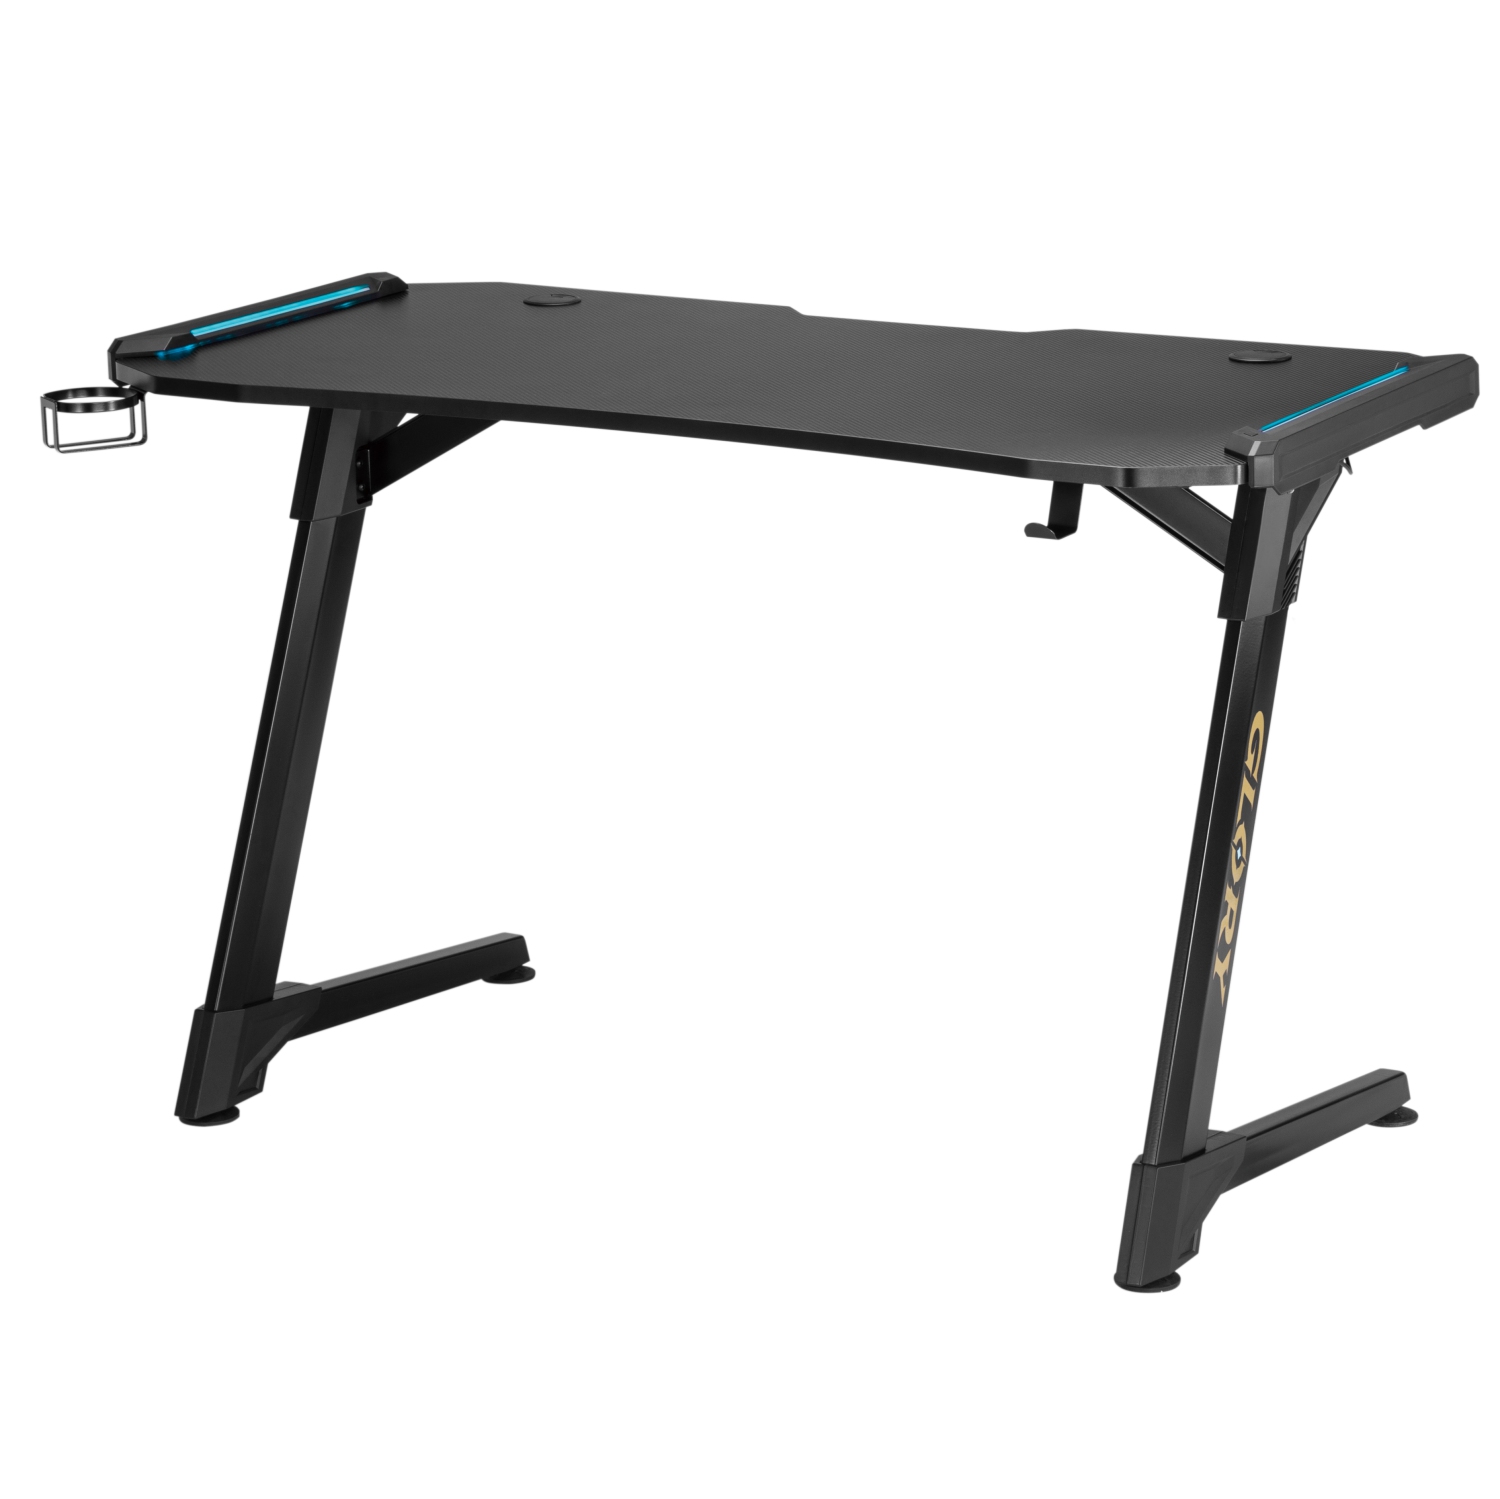 Duramex (TM) RGB Lighting Gaming Desk 1200X600MM/47.2" X23.6 Computer Home Office Table Desk Z Shaped PC Gaming Table Workstation with Cup Holder & Headphone Hook (Black)